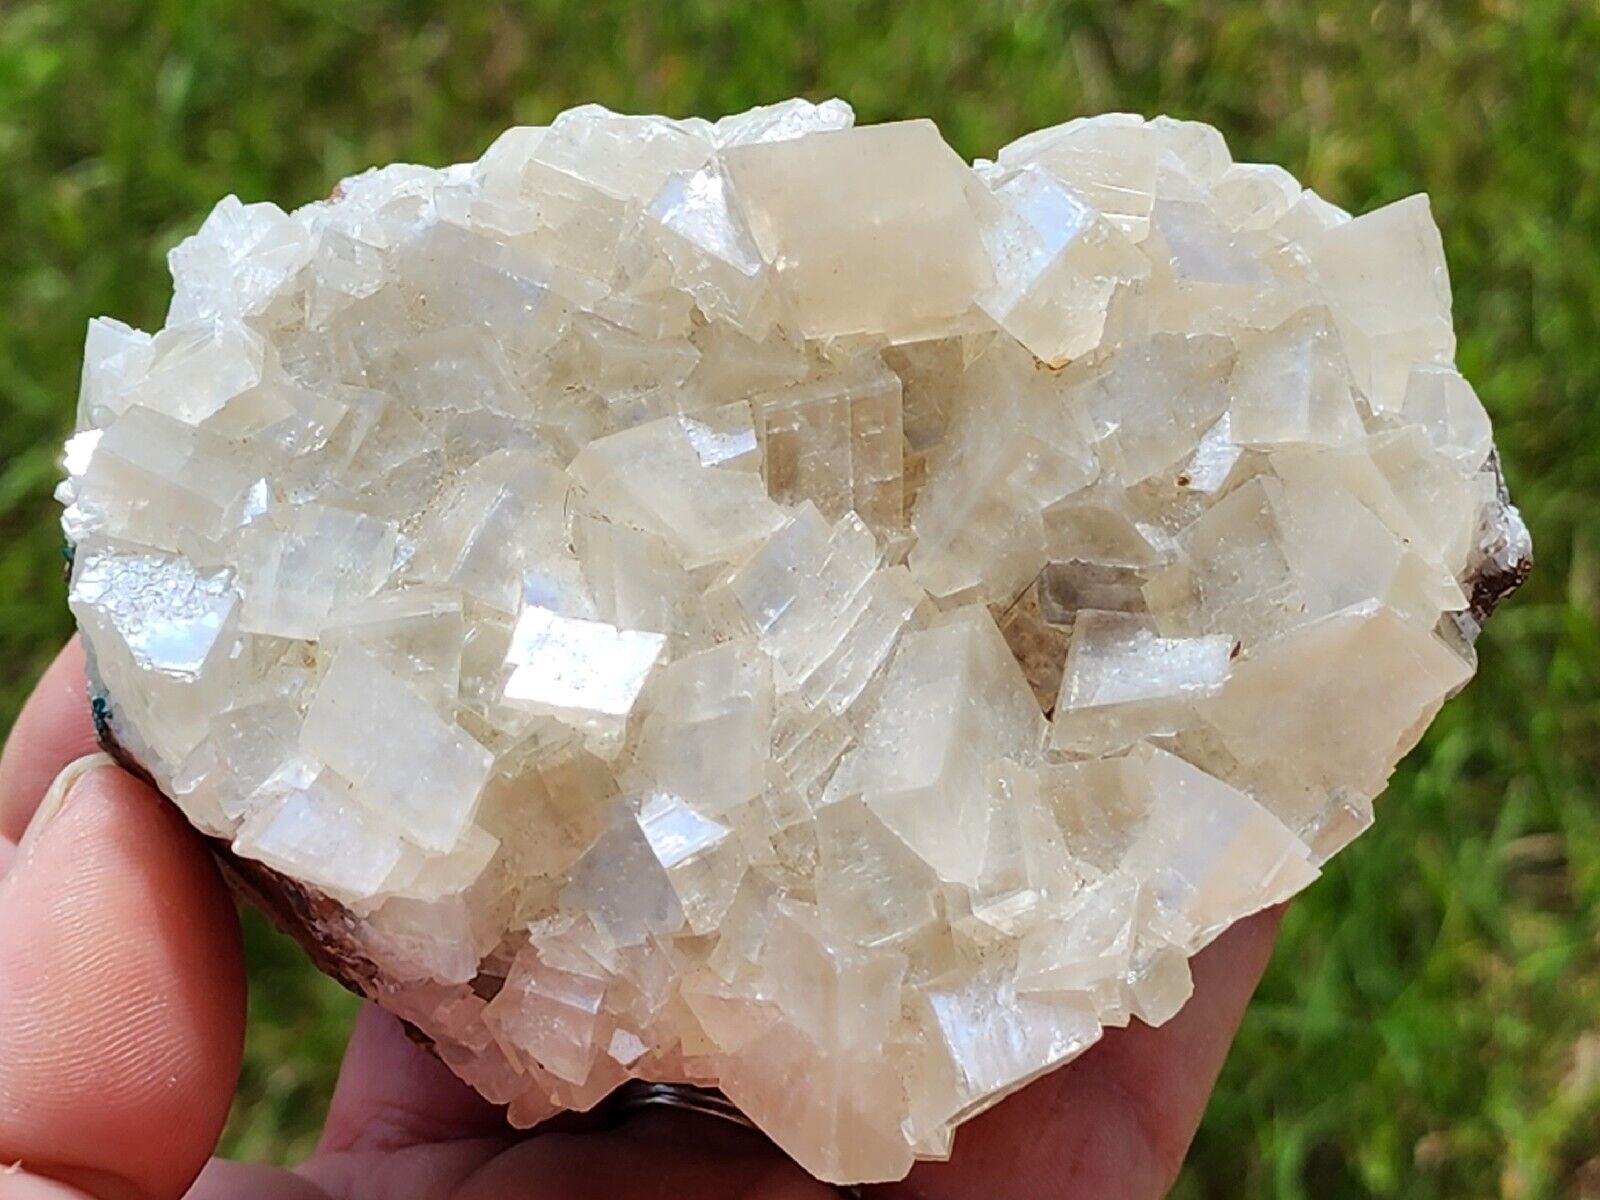 RARE, LG PEARLY LUSTER WHITE CALCITE RHOMB CRYSTALS,TSUMEB MINE,NAMIBIA 